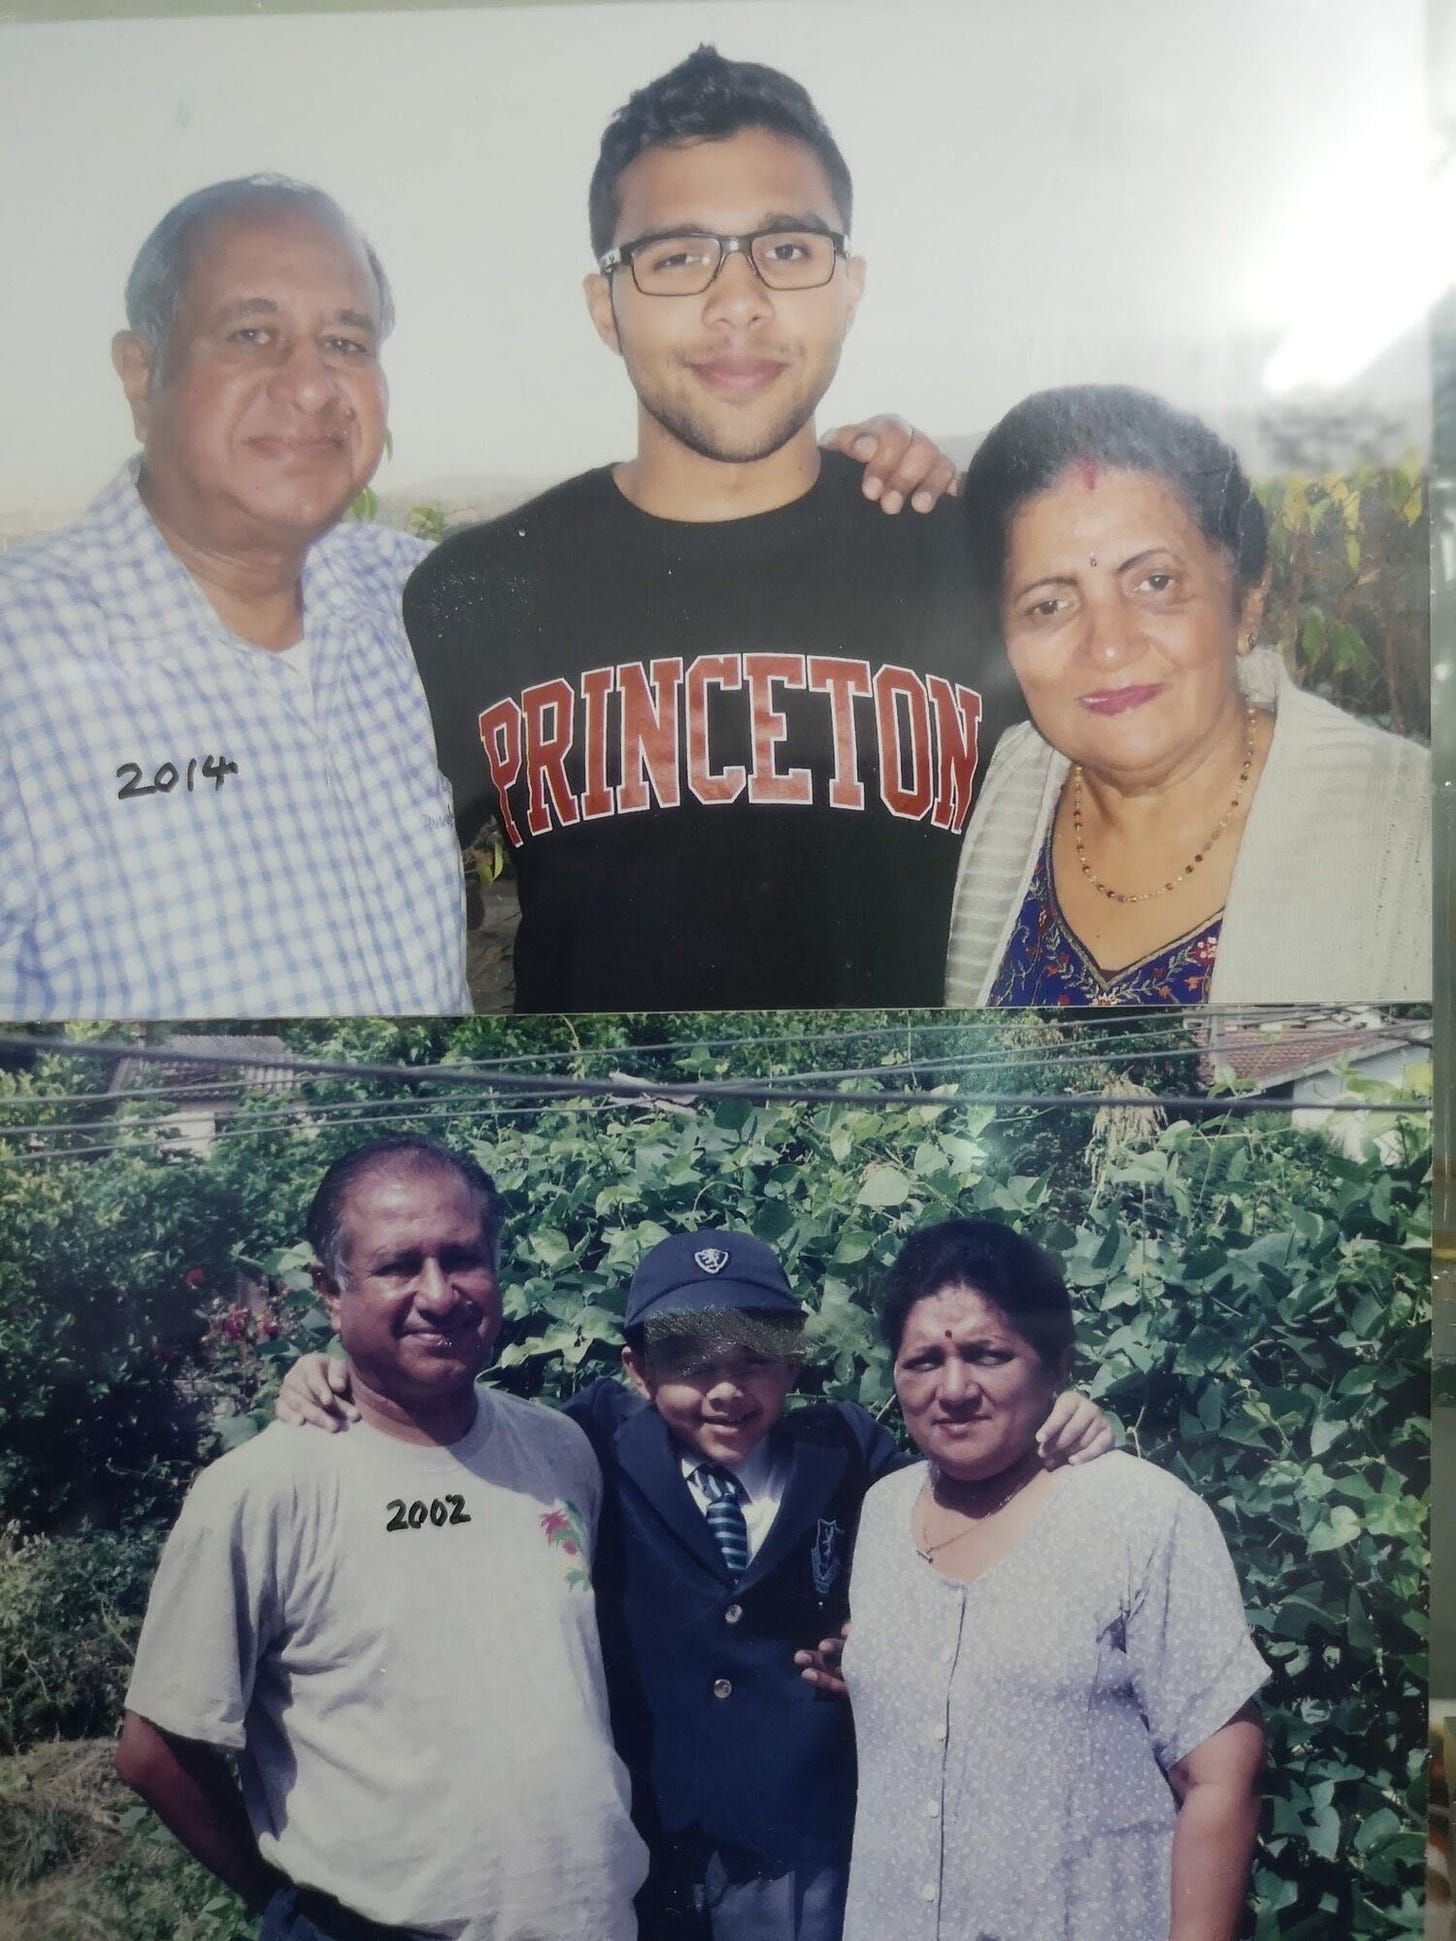 A photograph with my grandparents before my freshman year at Princeton University in 2014 (top) and on my first day of primary school in 2002 (bottom)